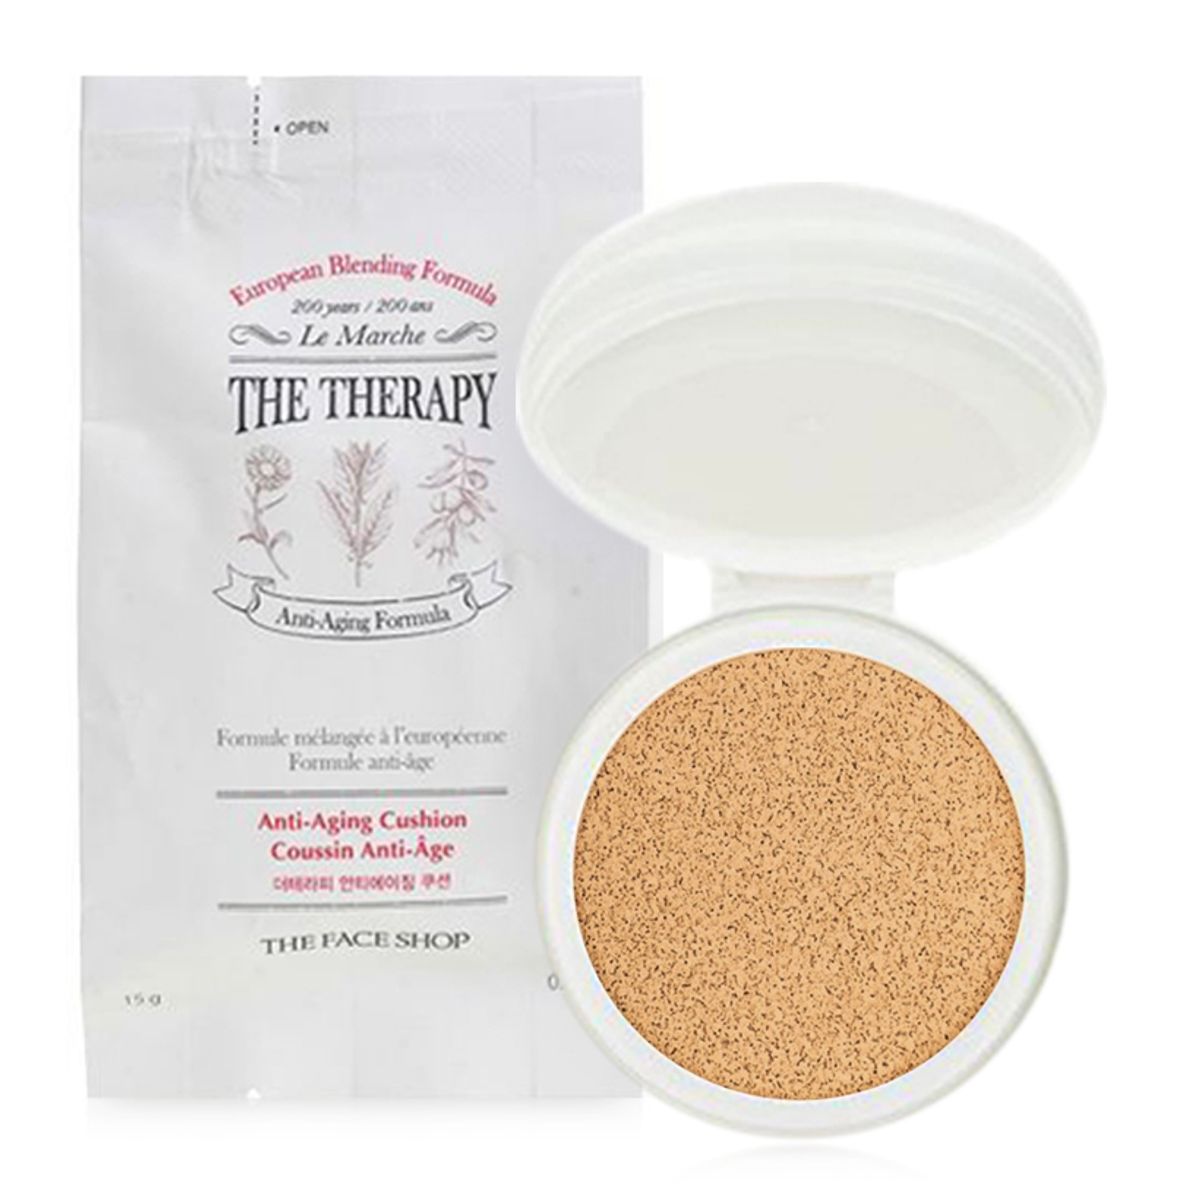 the-therapy-anti-aging-cushion-spf50-pa-n201-refill-1